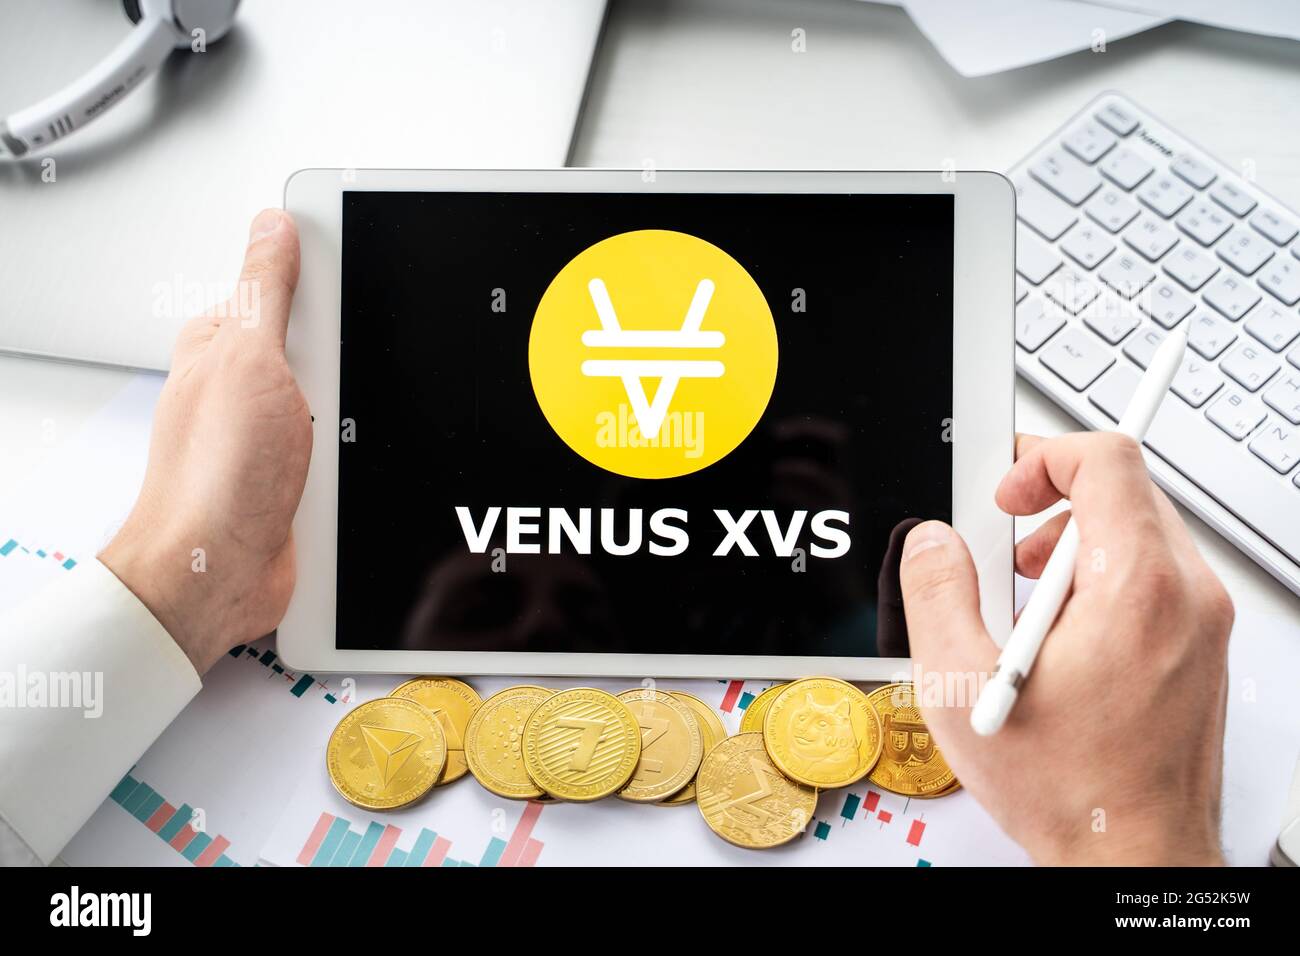 Russia Moscow 06.05.2021 Logo of cryptocurrency DEX decentralized money market, stablecoin protocol Venus XVS in tablet.Trading blockchain platform to Stock Photo